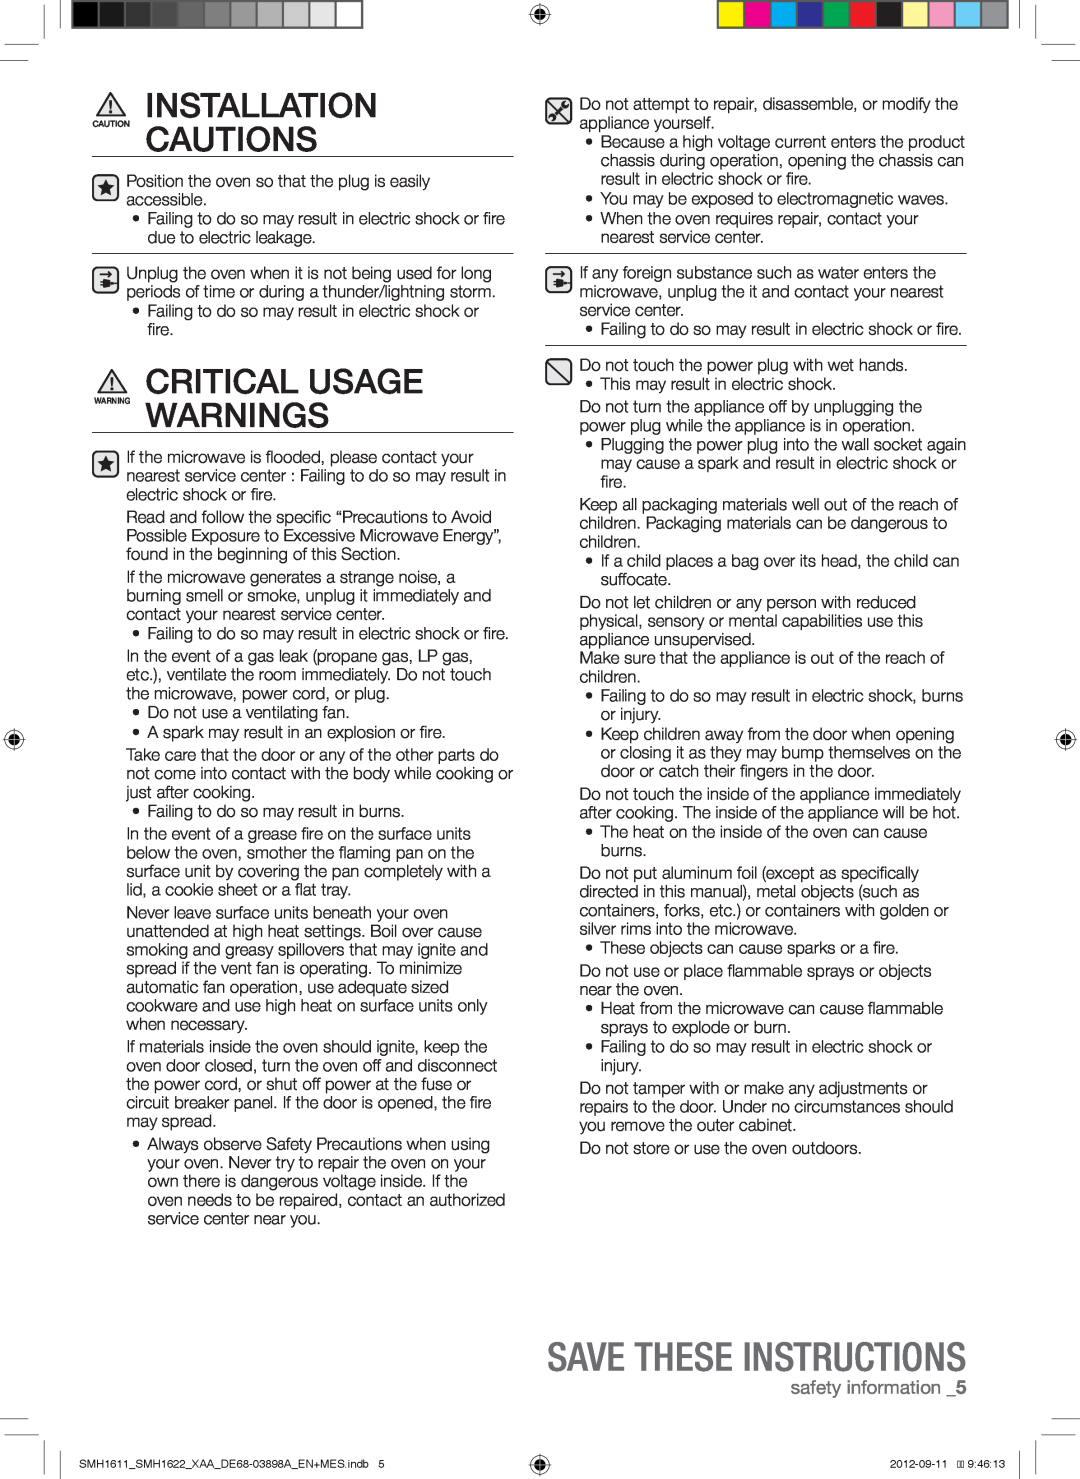 Samsung SMH1622S, SMH1611, SMH1622B, SMH1622W user manual Installation, Save These Instructions, safety information 